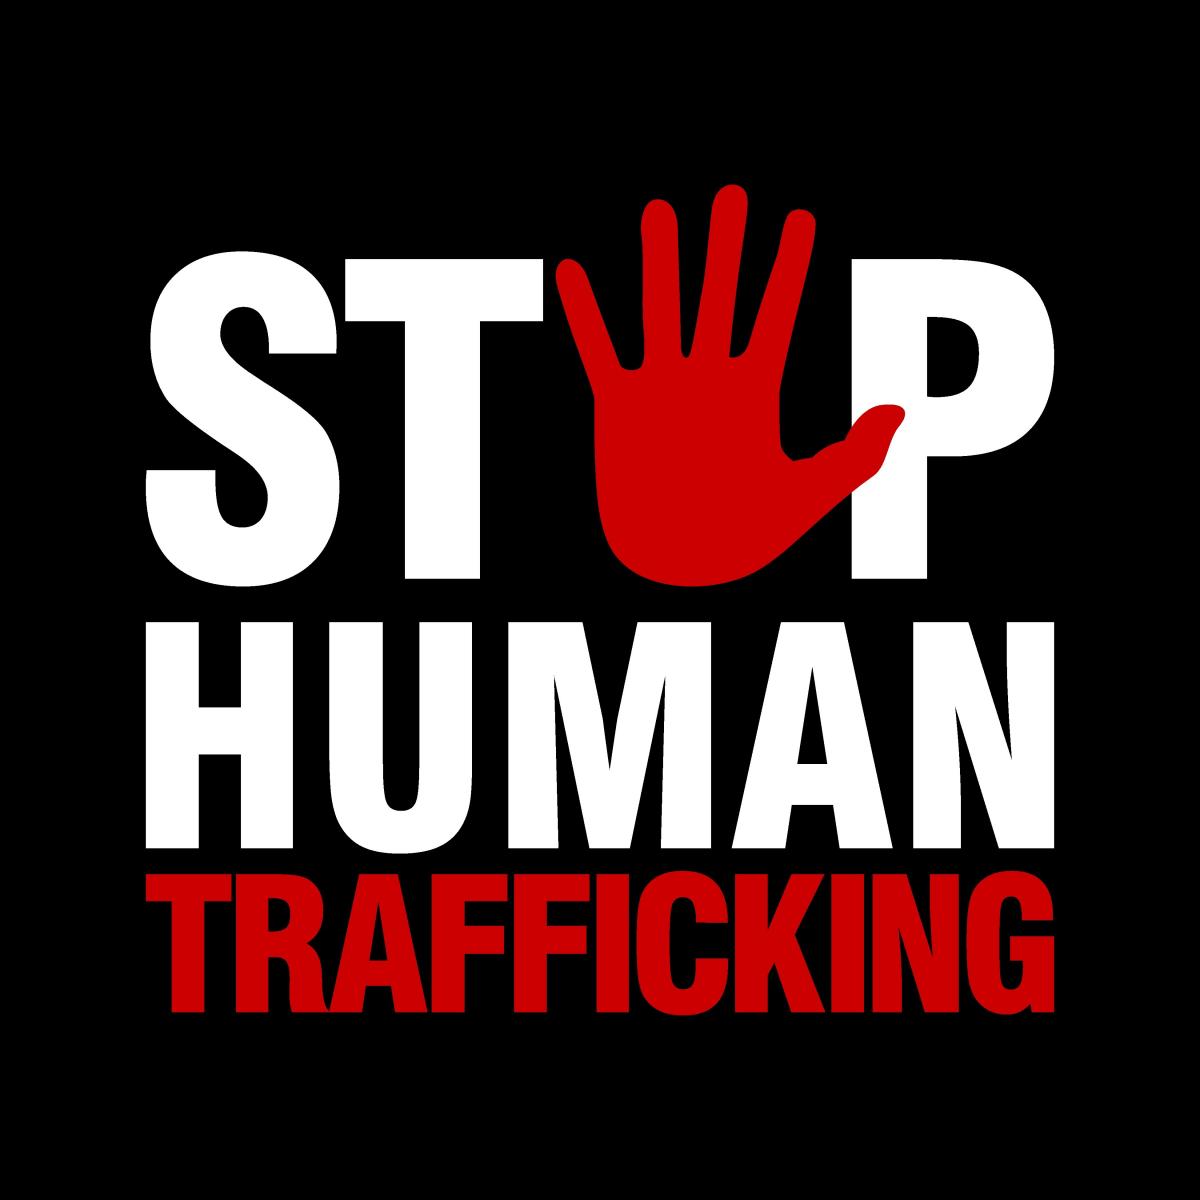 no travel for traffickers act